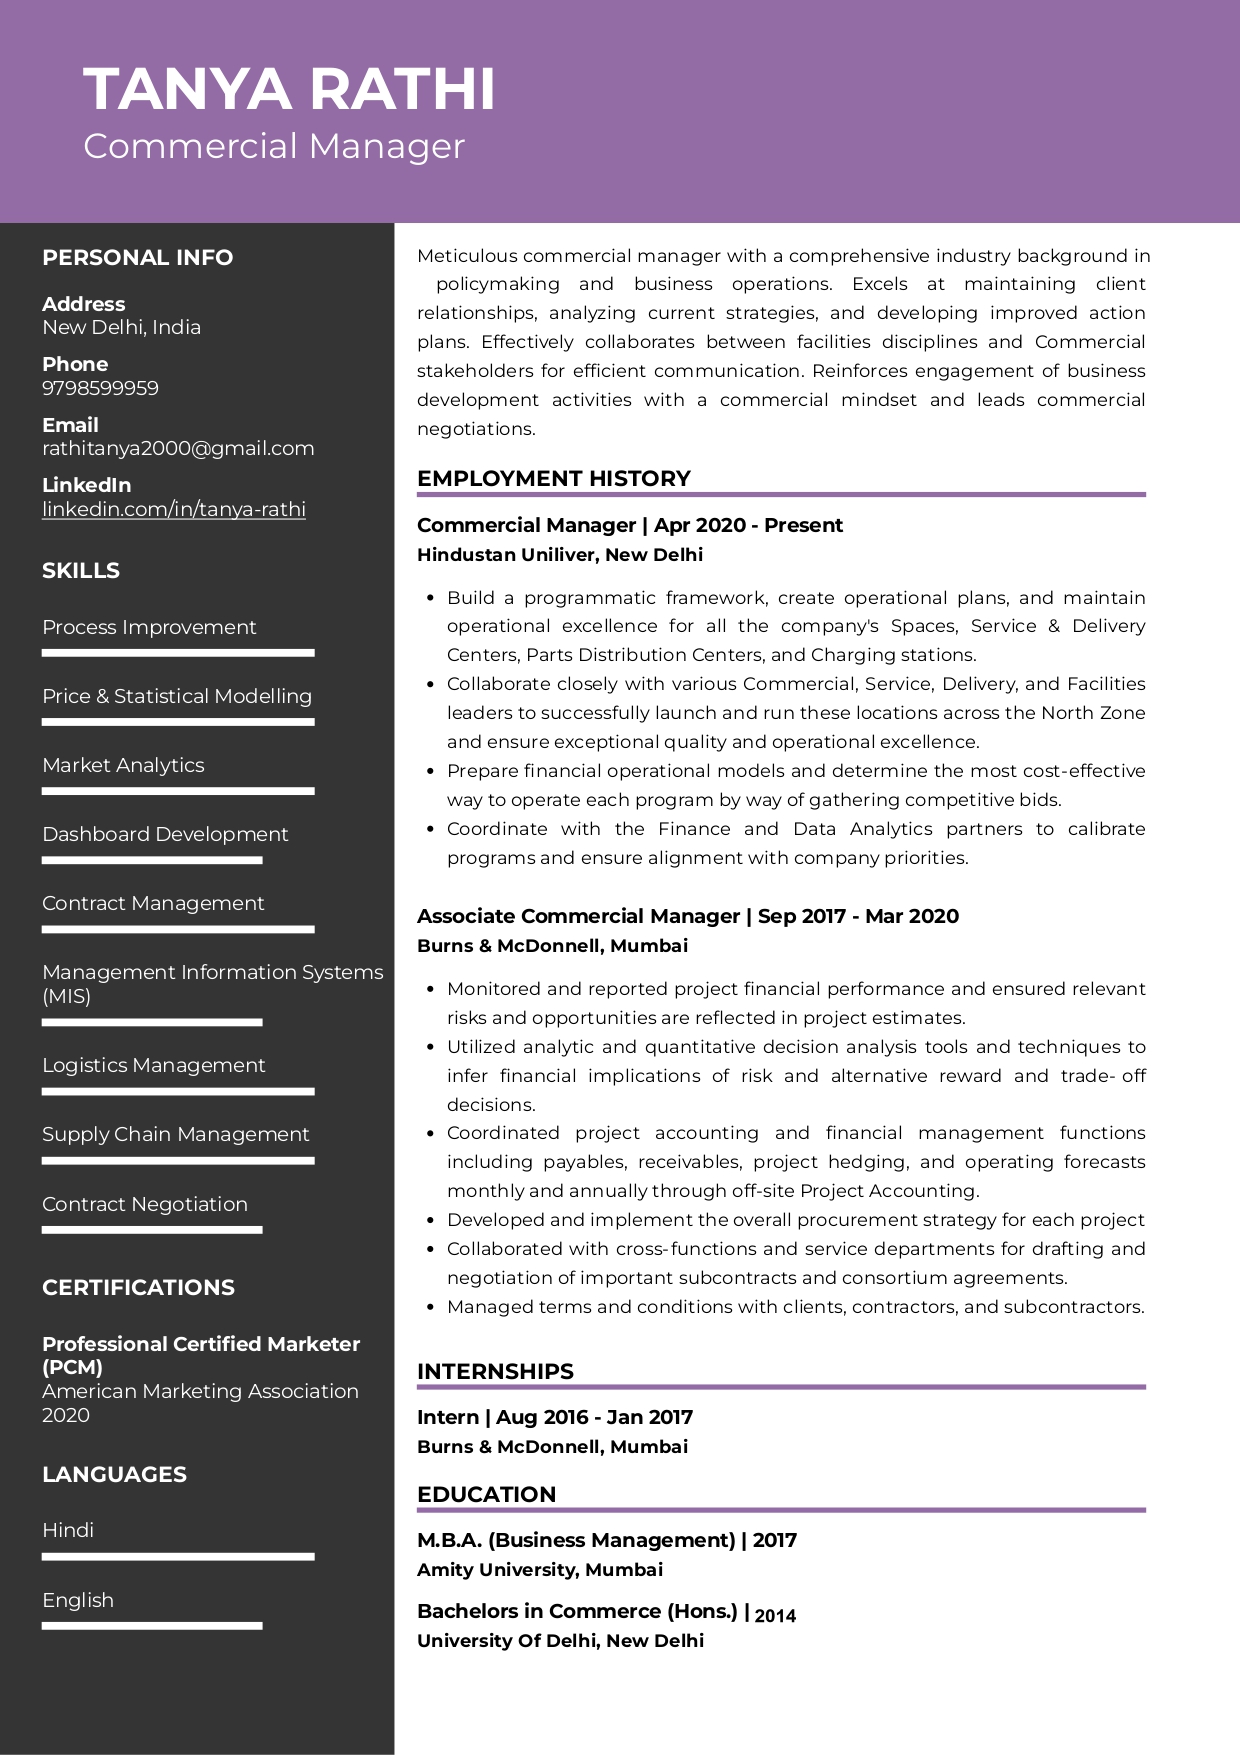 Resume of Commercial Manager